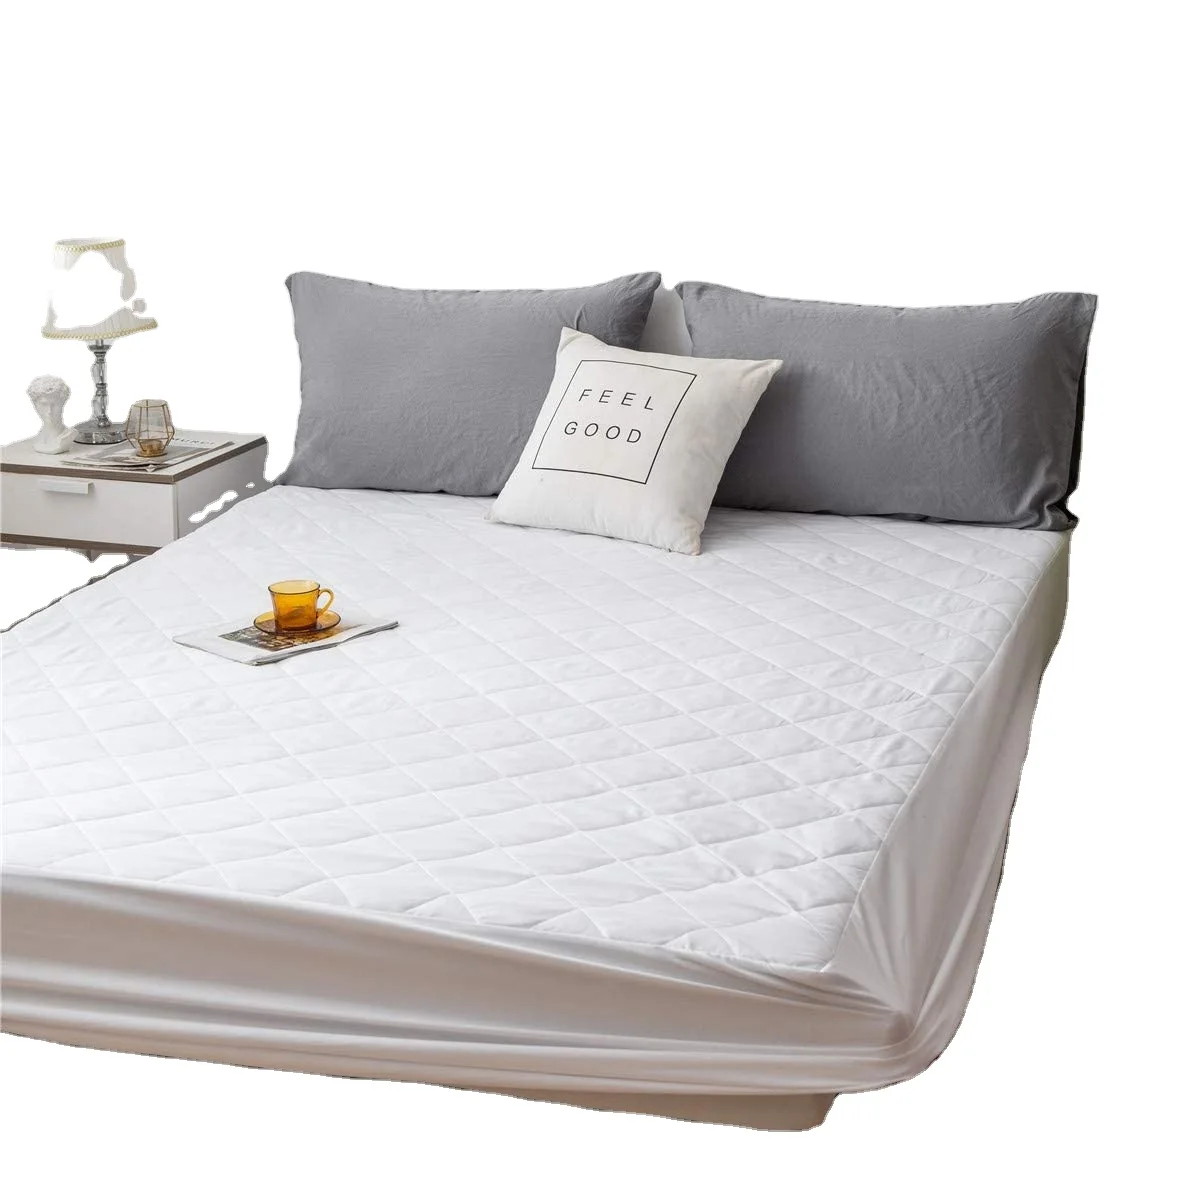 Sleeping Partner King Bed White Feather and Down Mattress Topper/Pad (1600251887800)